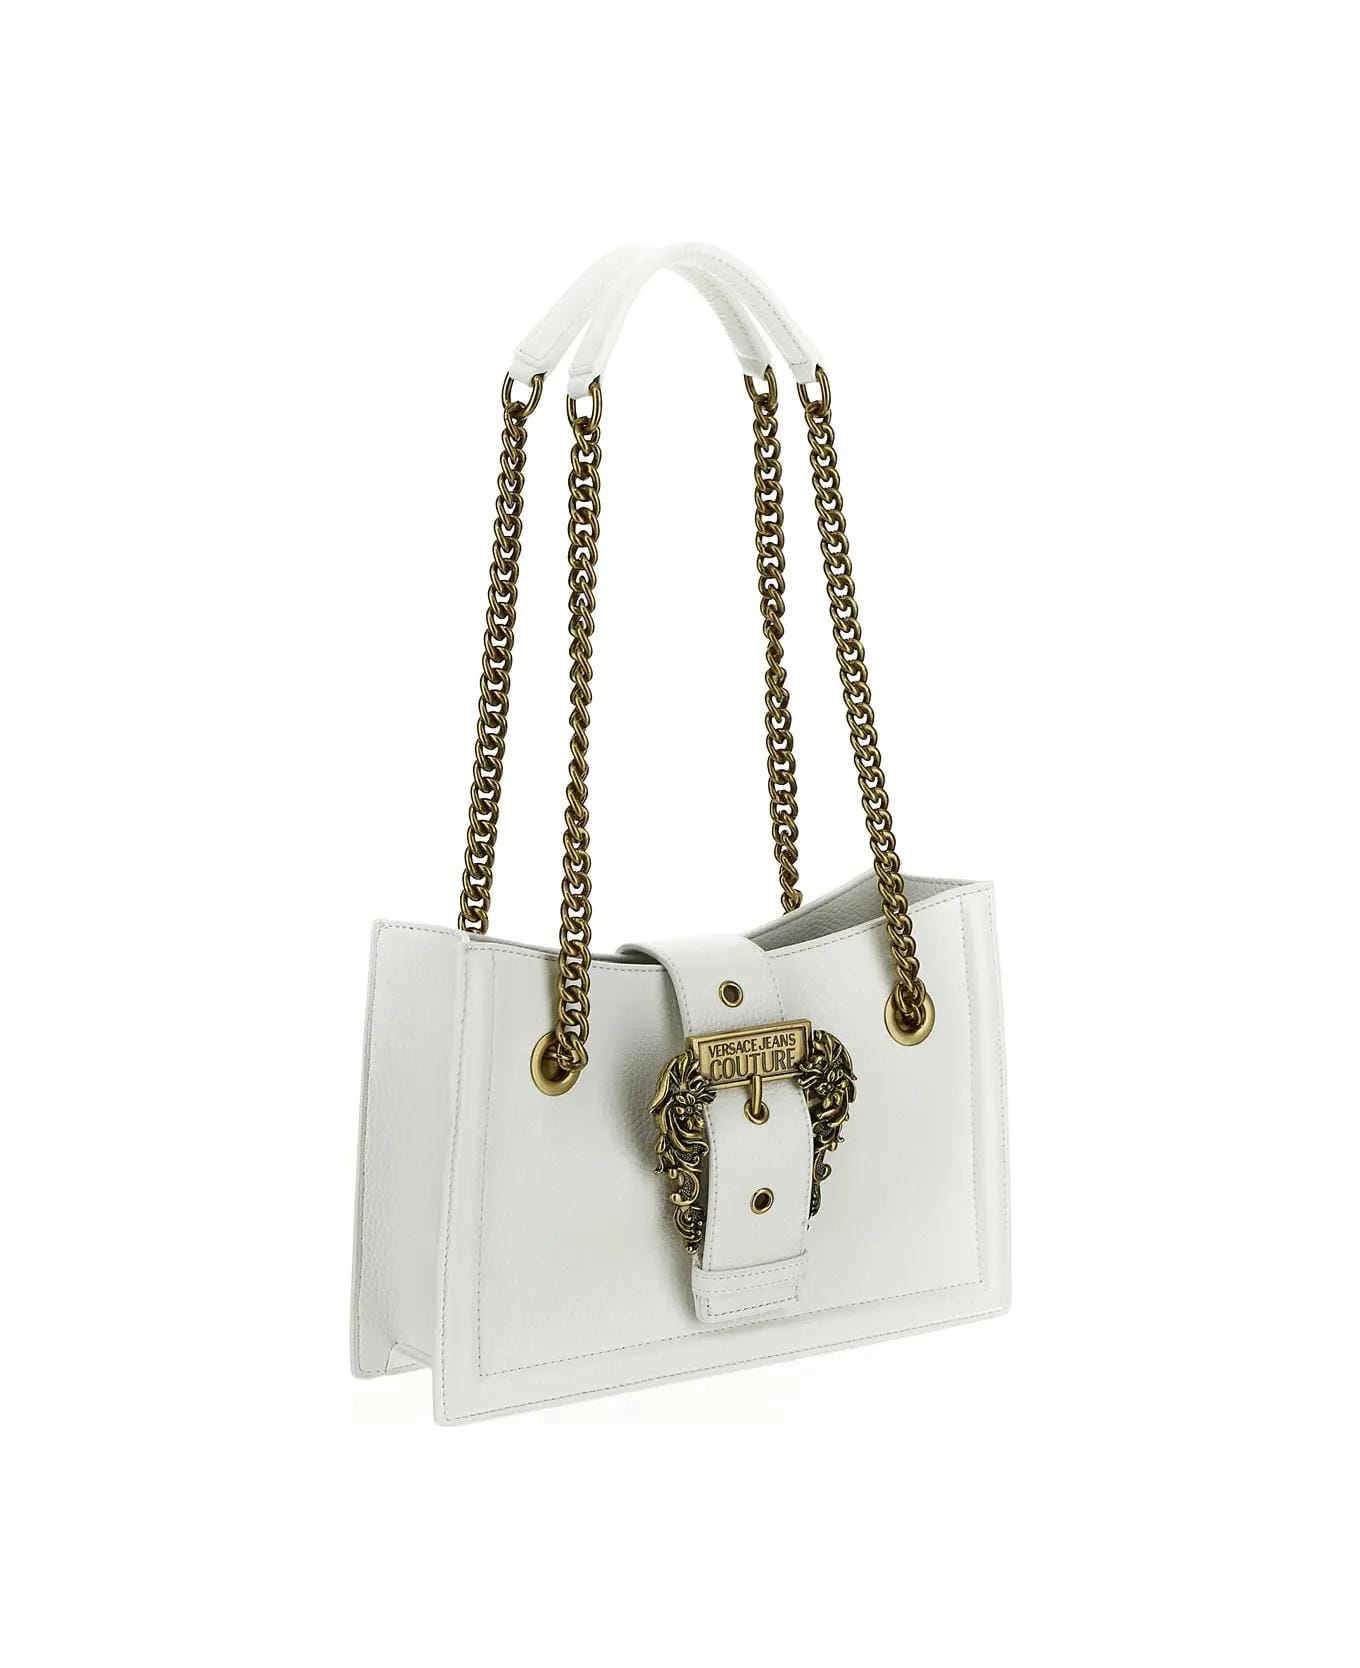 Versace Jeans Couture Embossed Buckle Shoulder Bag - White ショルダーバッグ